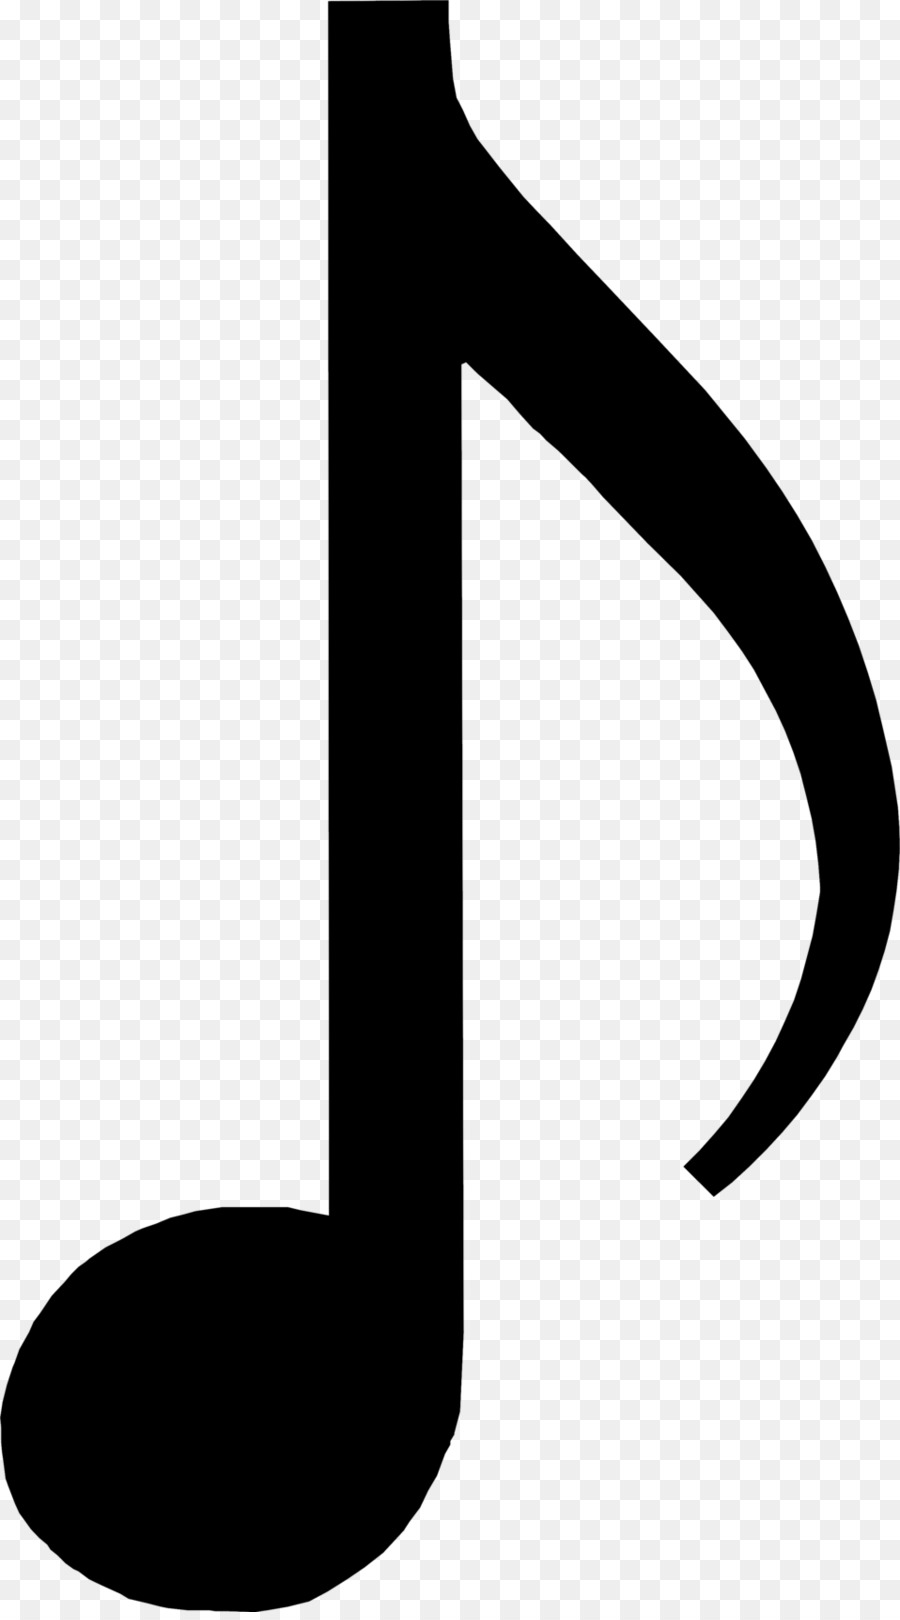 Musical note Clip art - musical note png download - 958*1716 - Free Transparent  png Download.